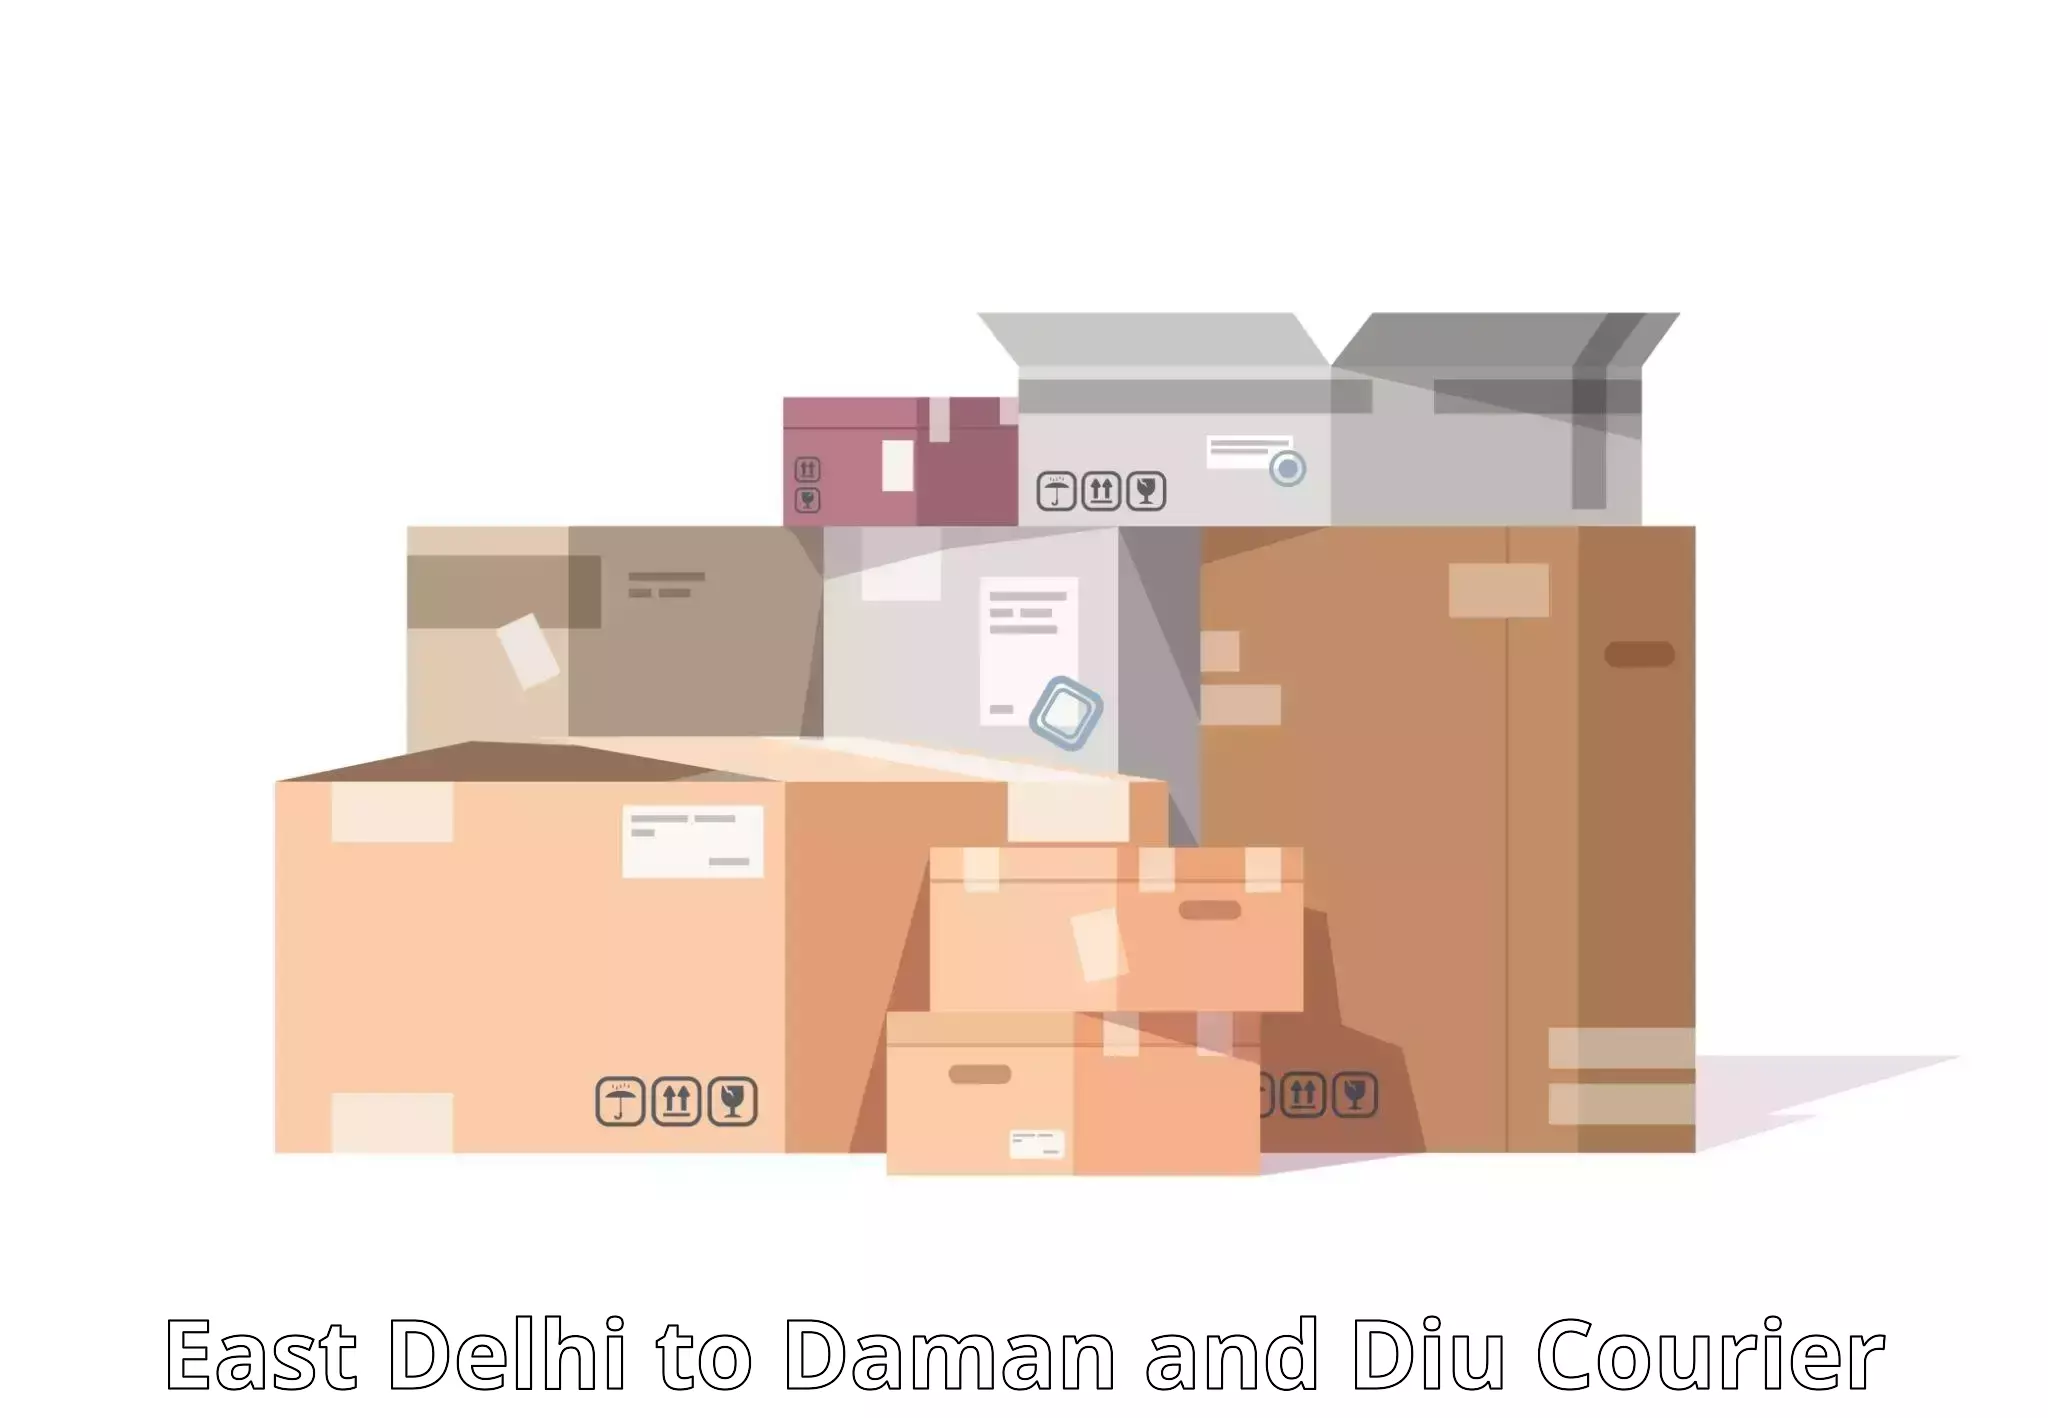 Express mail service East Delhi to Daman and Diu